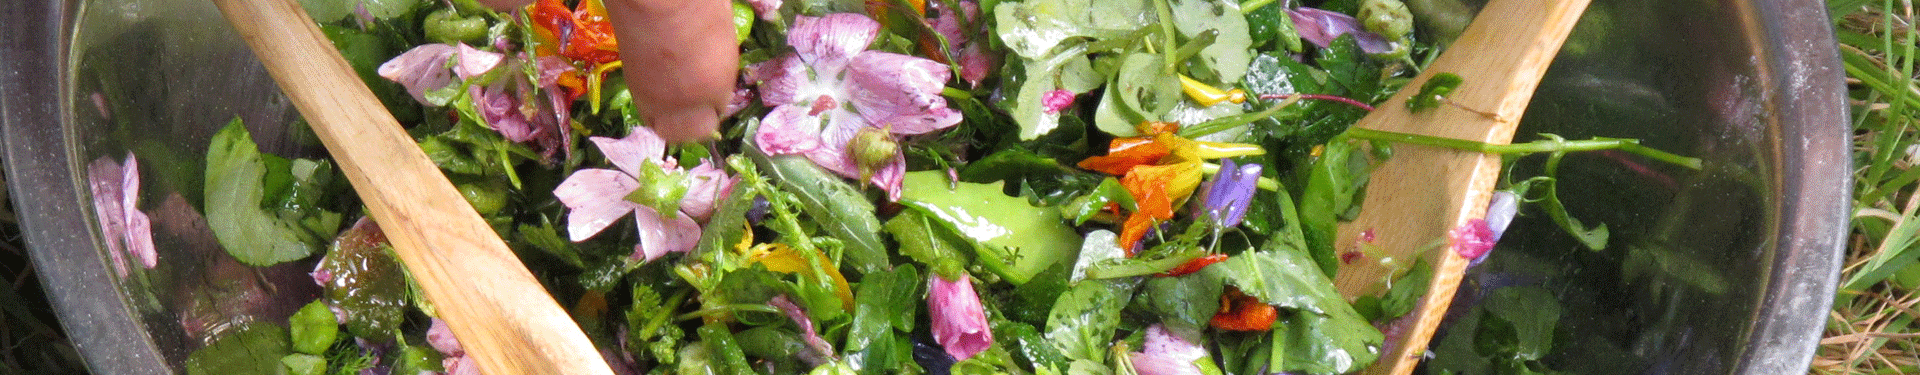 journeys about edible and medicinal plants